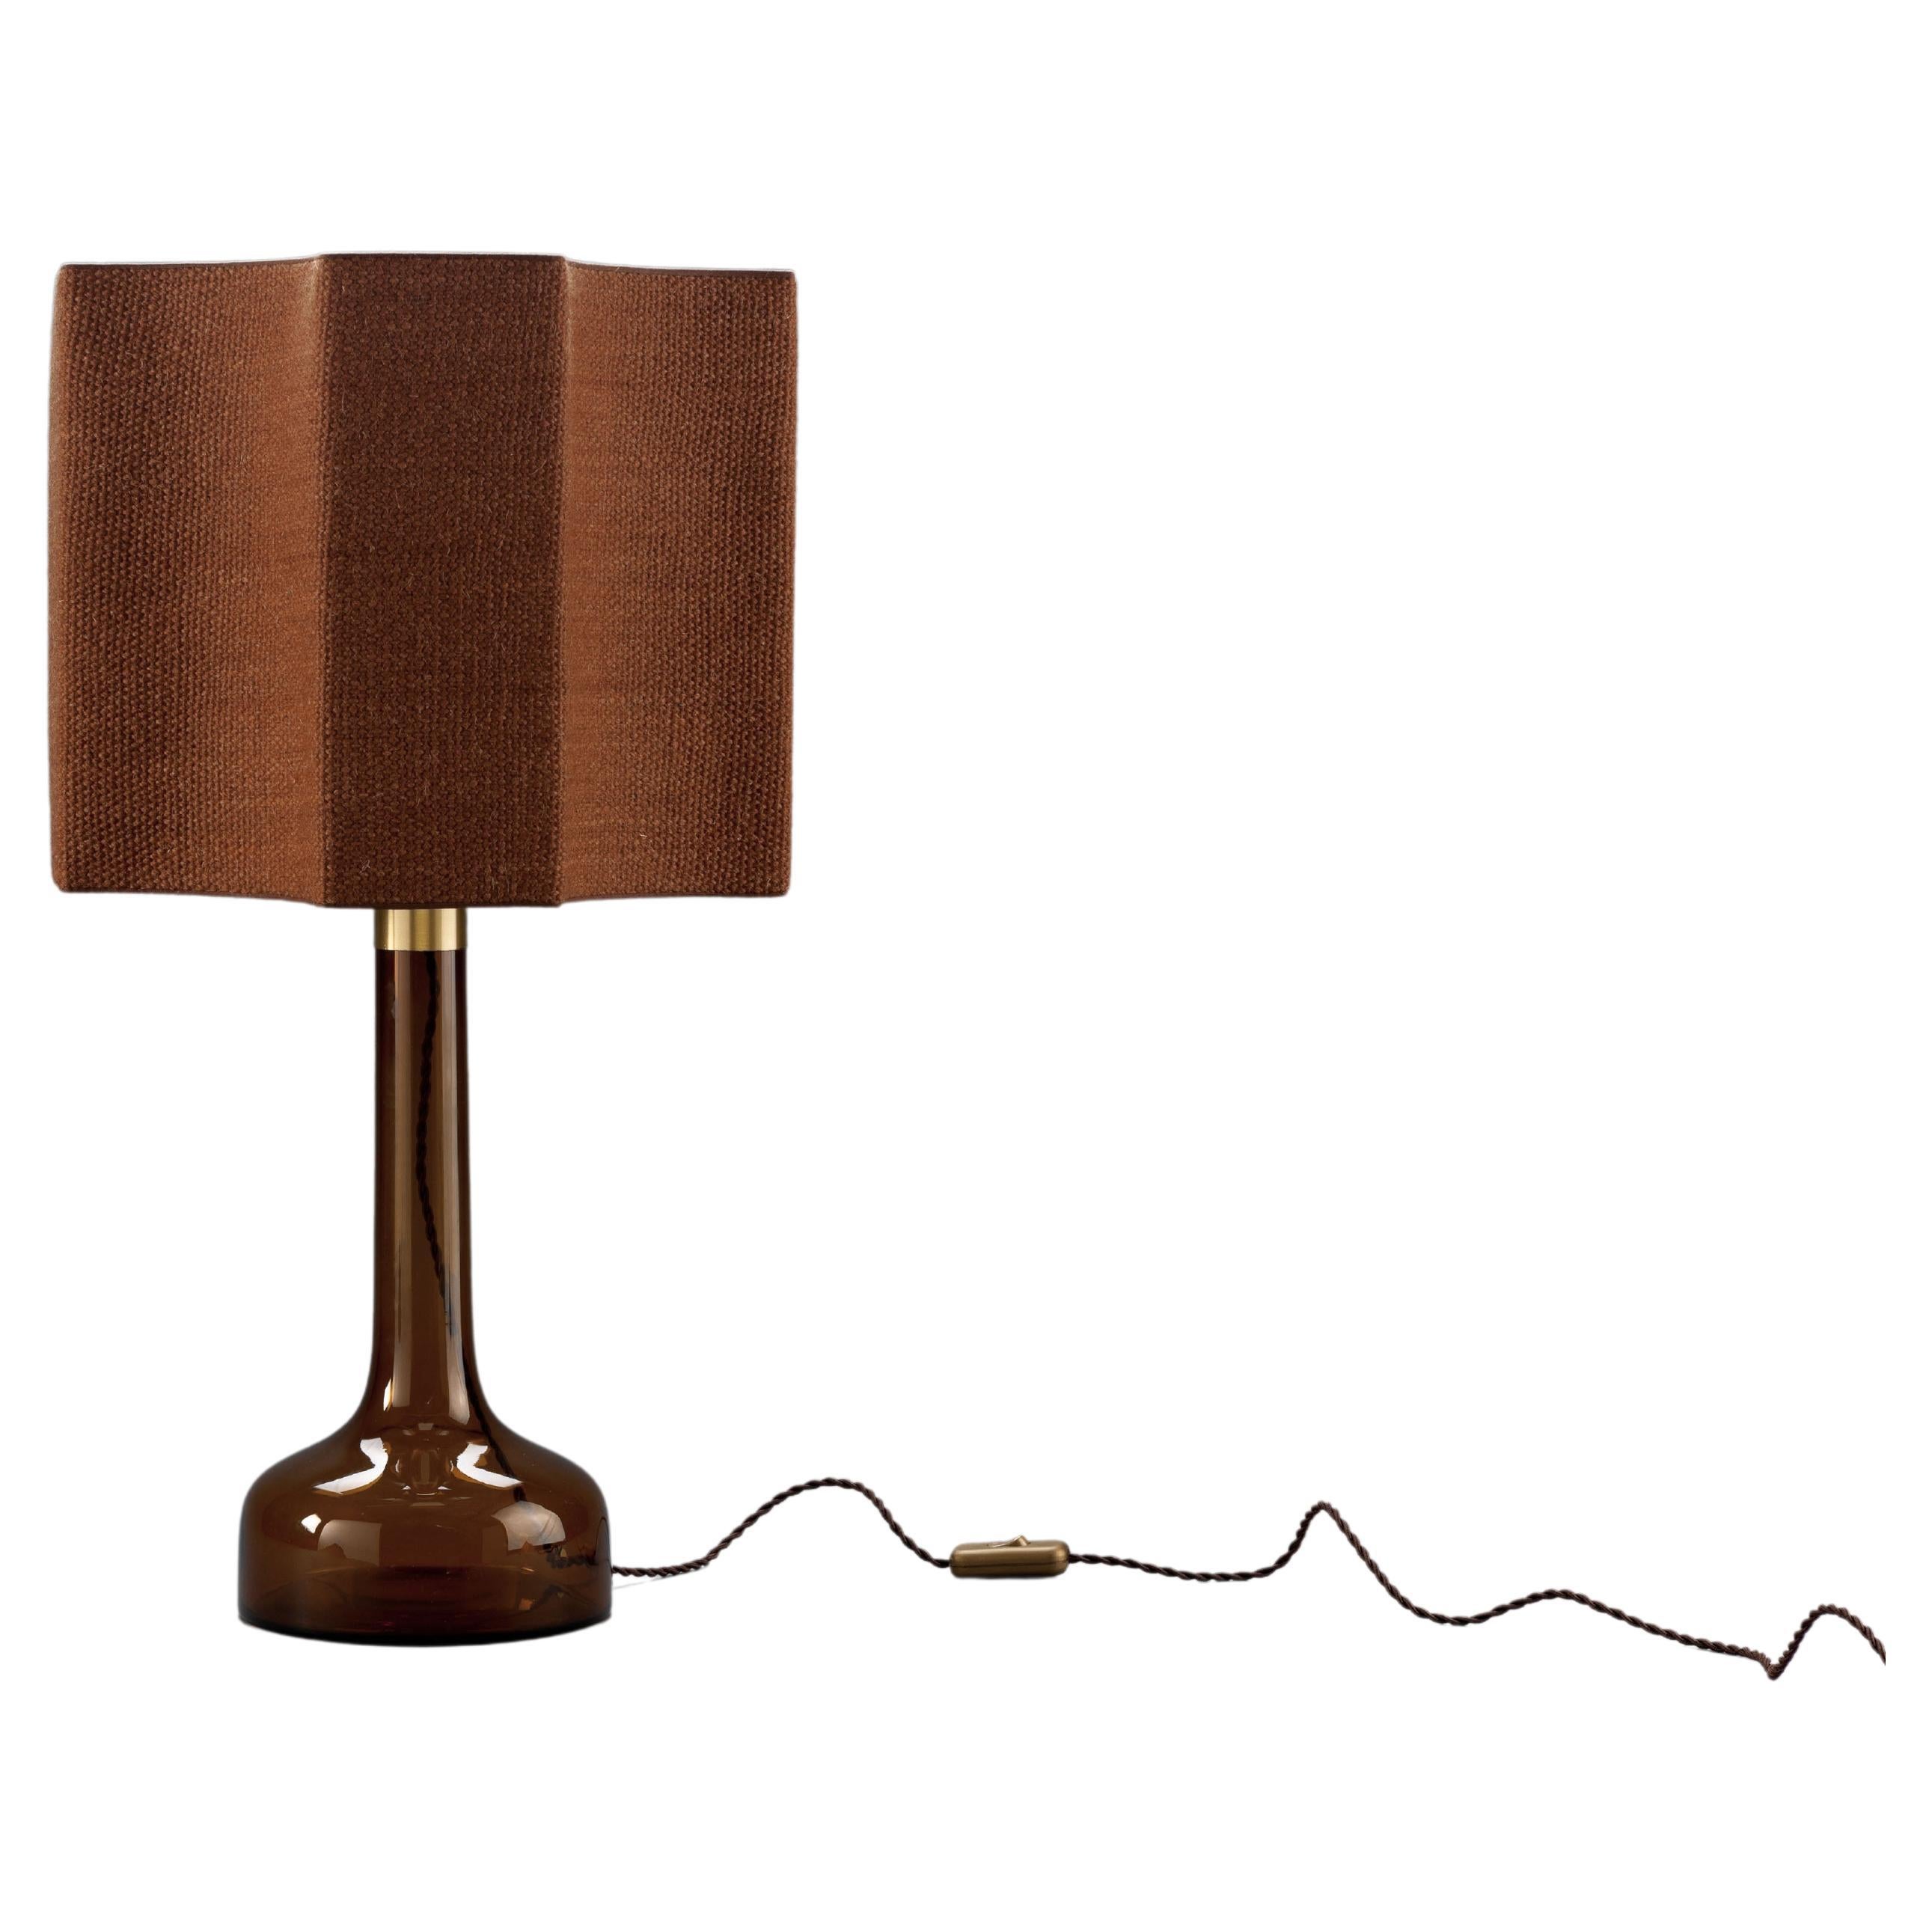 Beautiful tobacco-brown glass table lamp, mouth-blown at Holmegaard, Denmark for Le Klint, Denmark.
The special octagonal shade is a high-quality custom handmade shade, made of a hand-woven coarse fabric. The shade is gold on the inside which